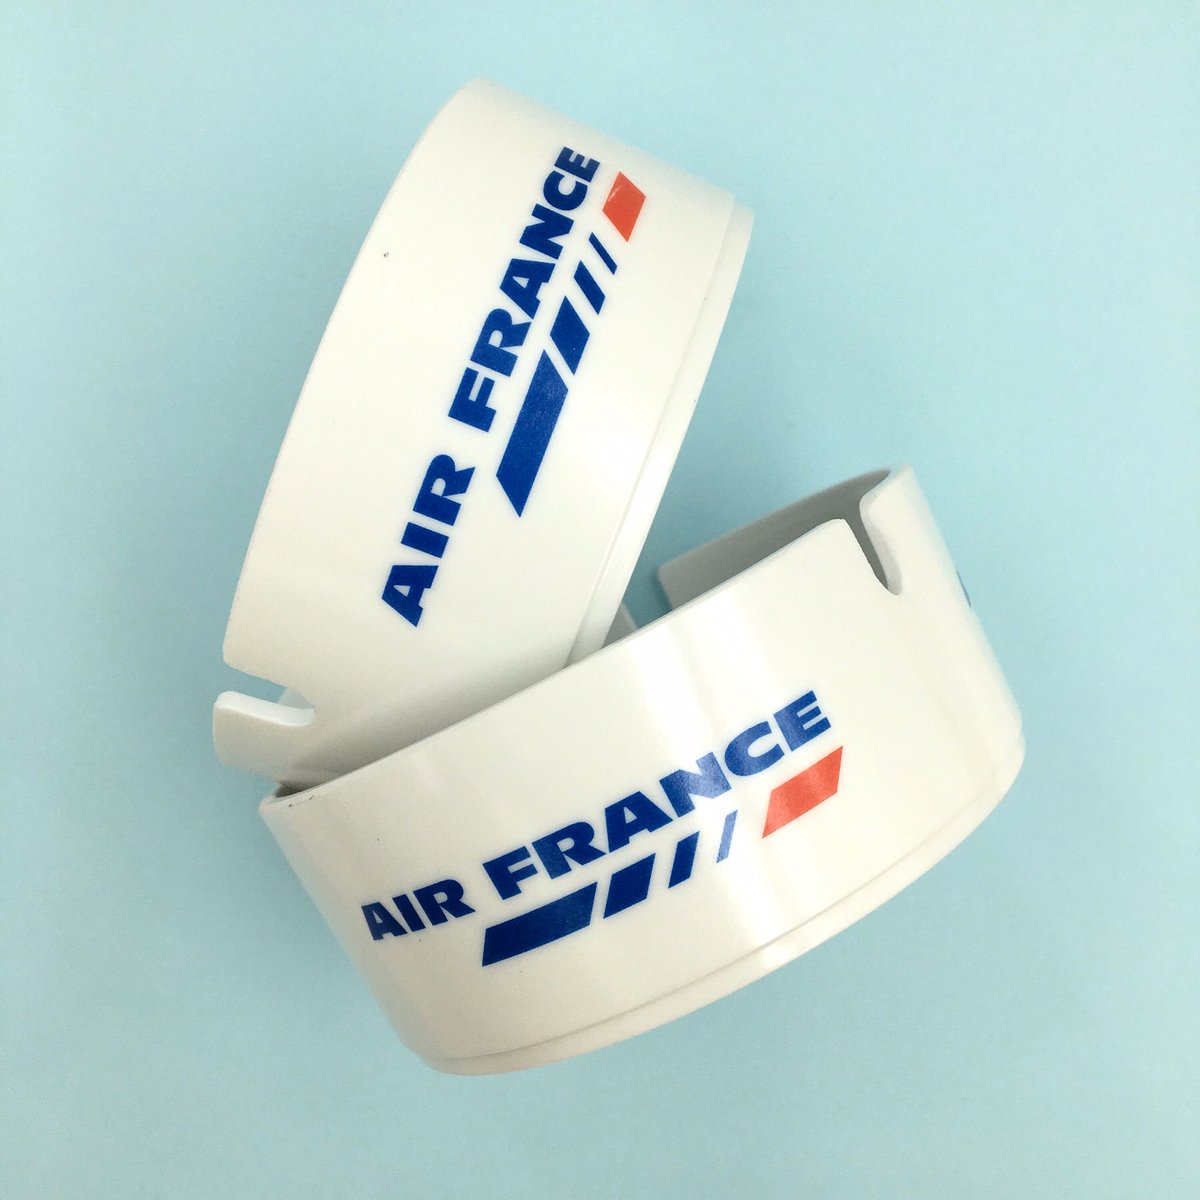 New In Shop #etsy :  #vintage #airfrance #ashtray #original #retro #collectibles #latelierdenanah #frenchvintage etsy.me/2wZELsw